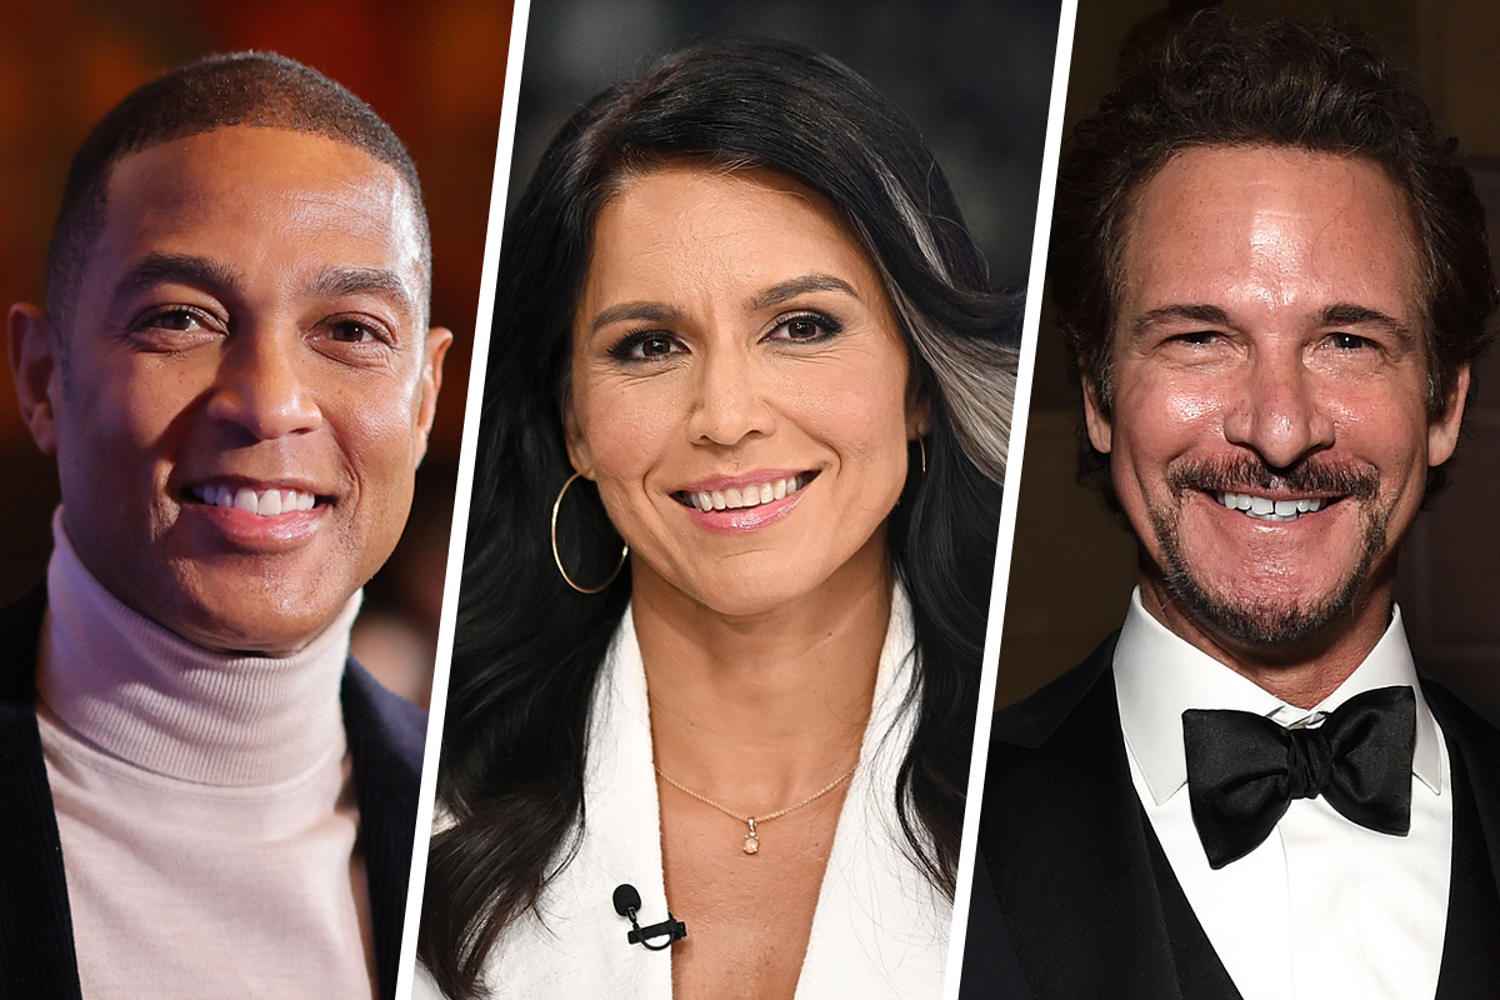 X partnering with Don Lemon, Tulsi Gabbard and Jim Rome to launch new shows